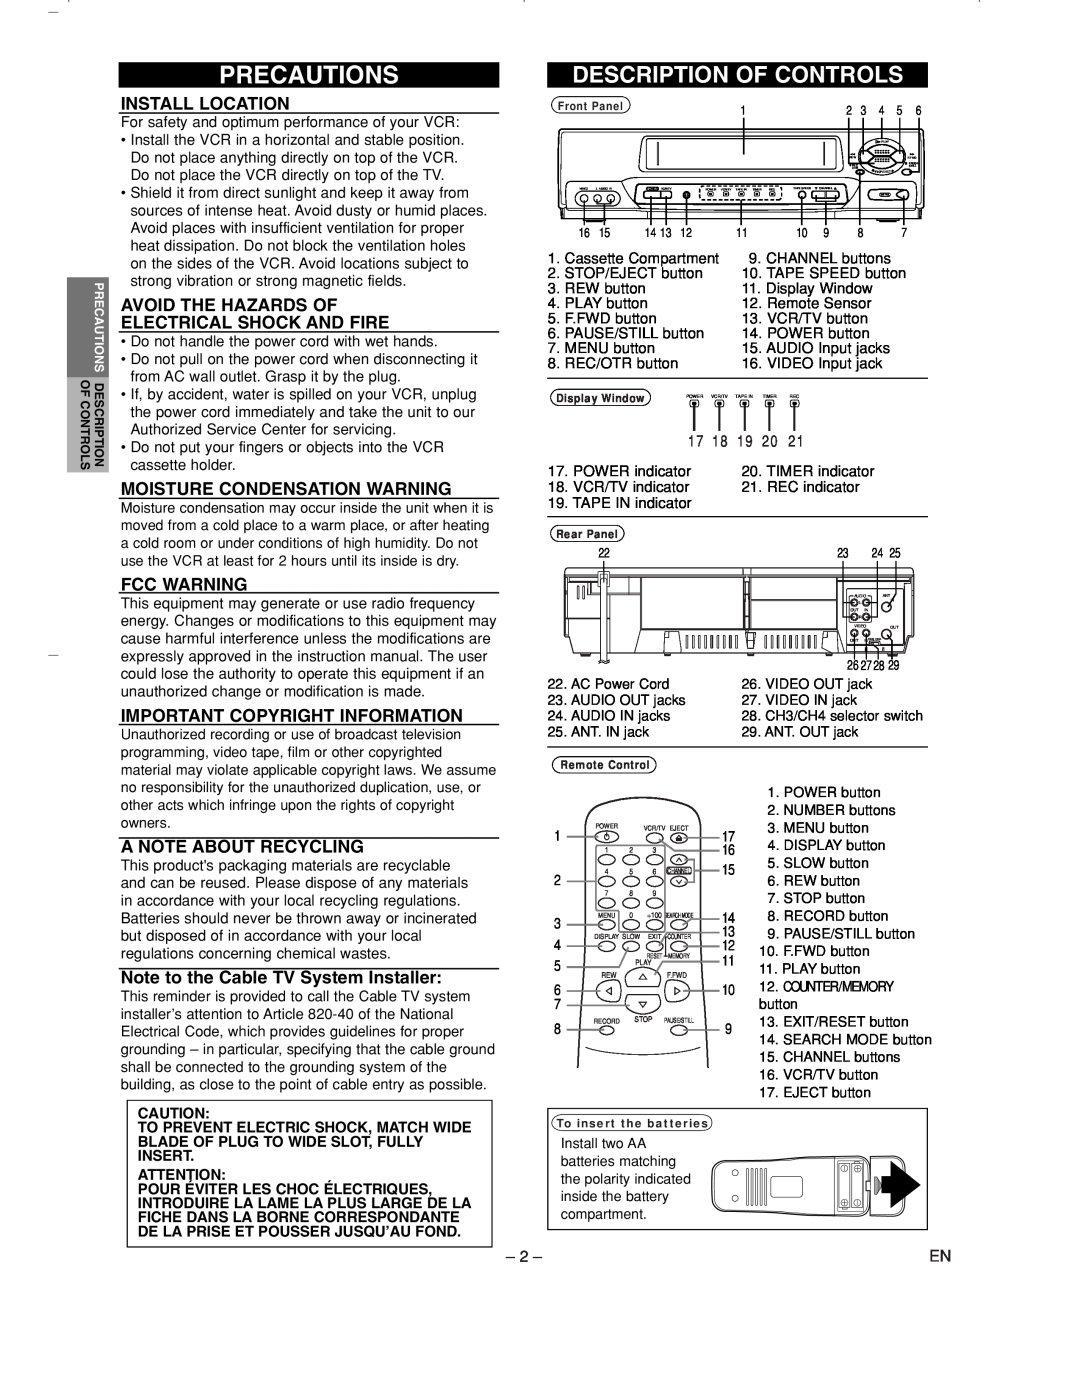 Sylvania 6260VC1 owner manual Precautions, Install Location, Avoid The Hazards Of Electrical Shock And Fire, Fcc Warning 